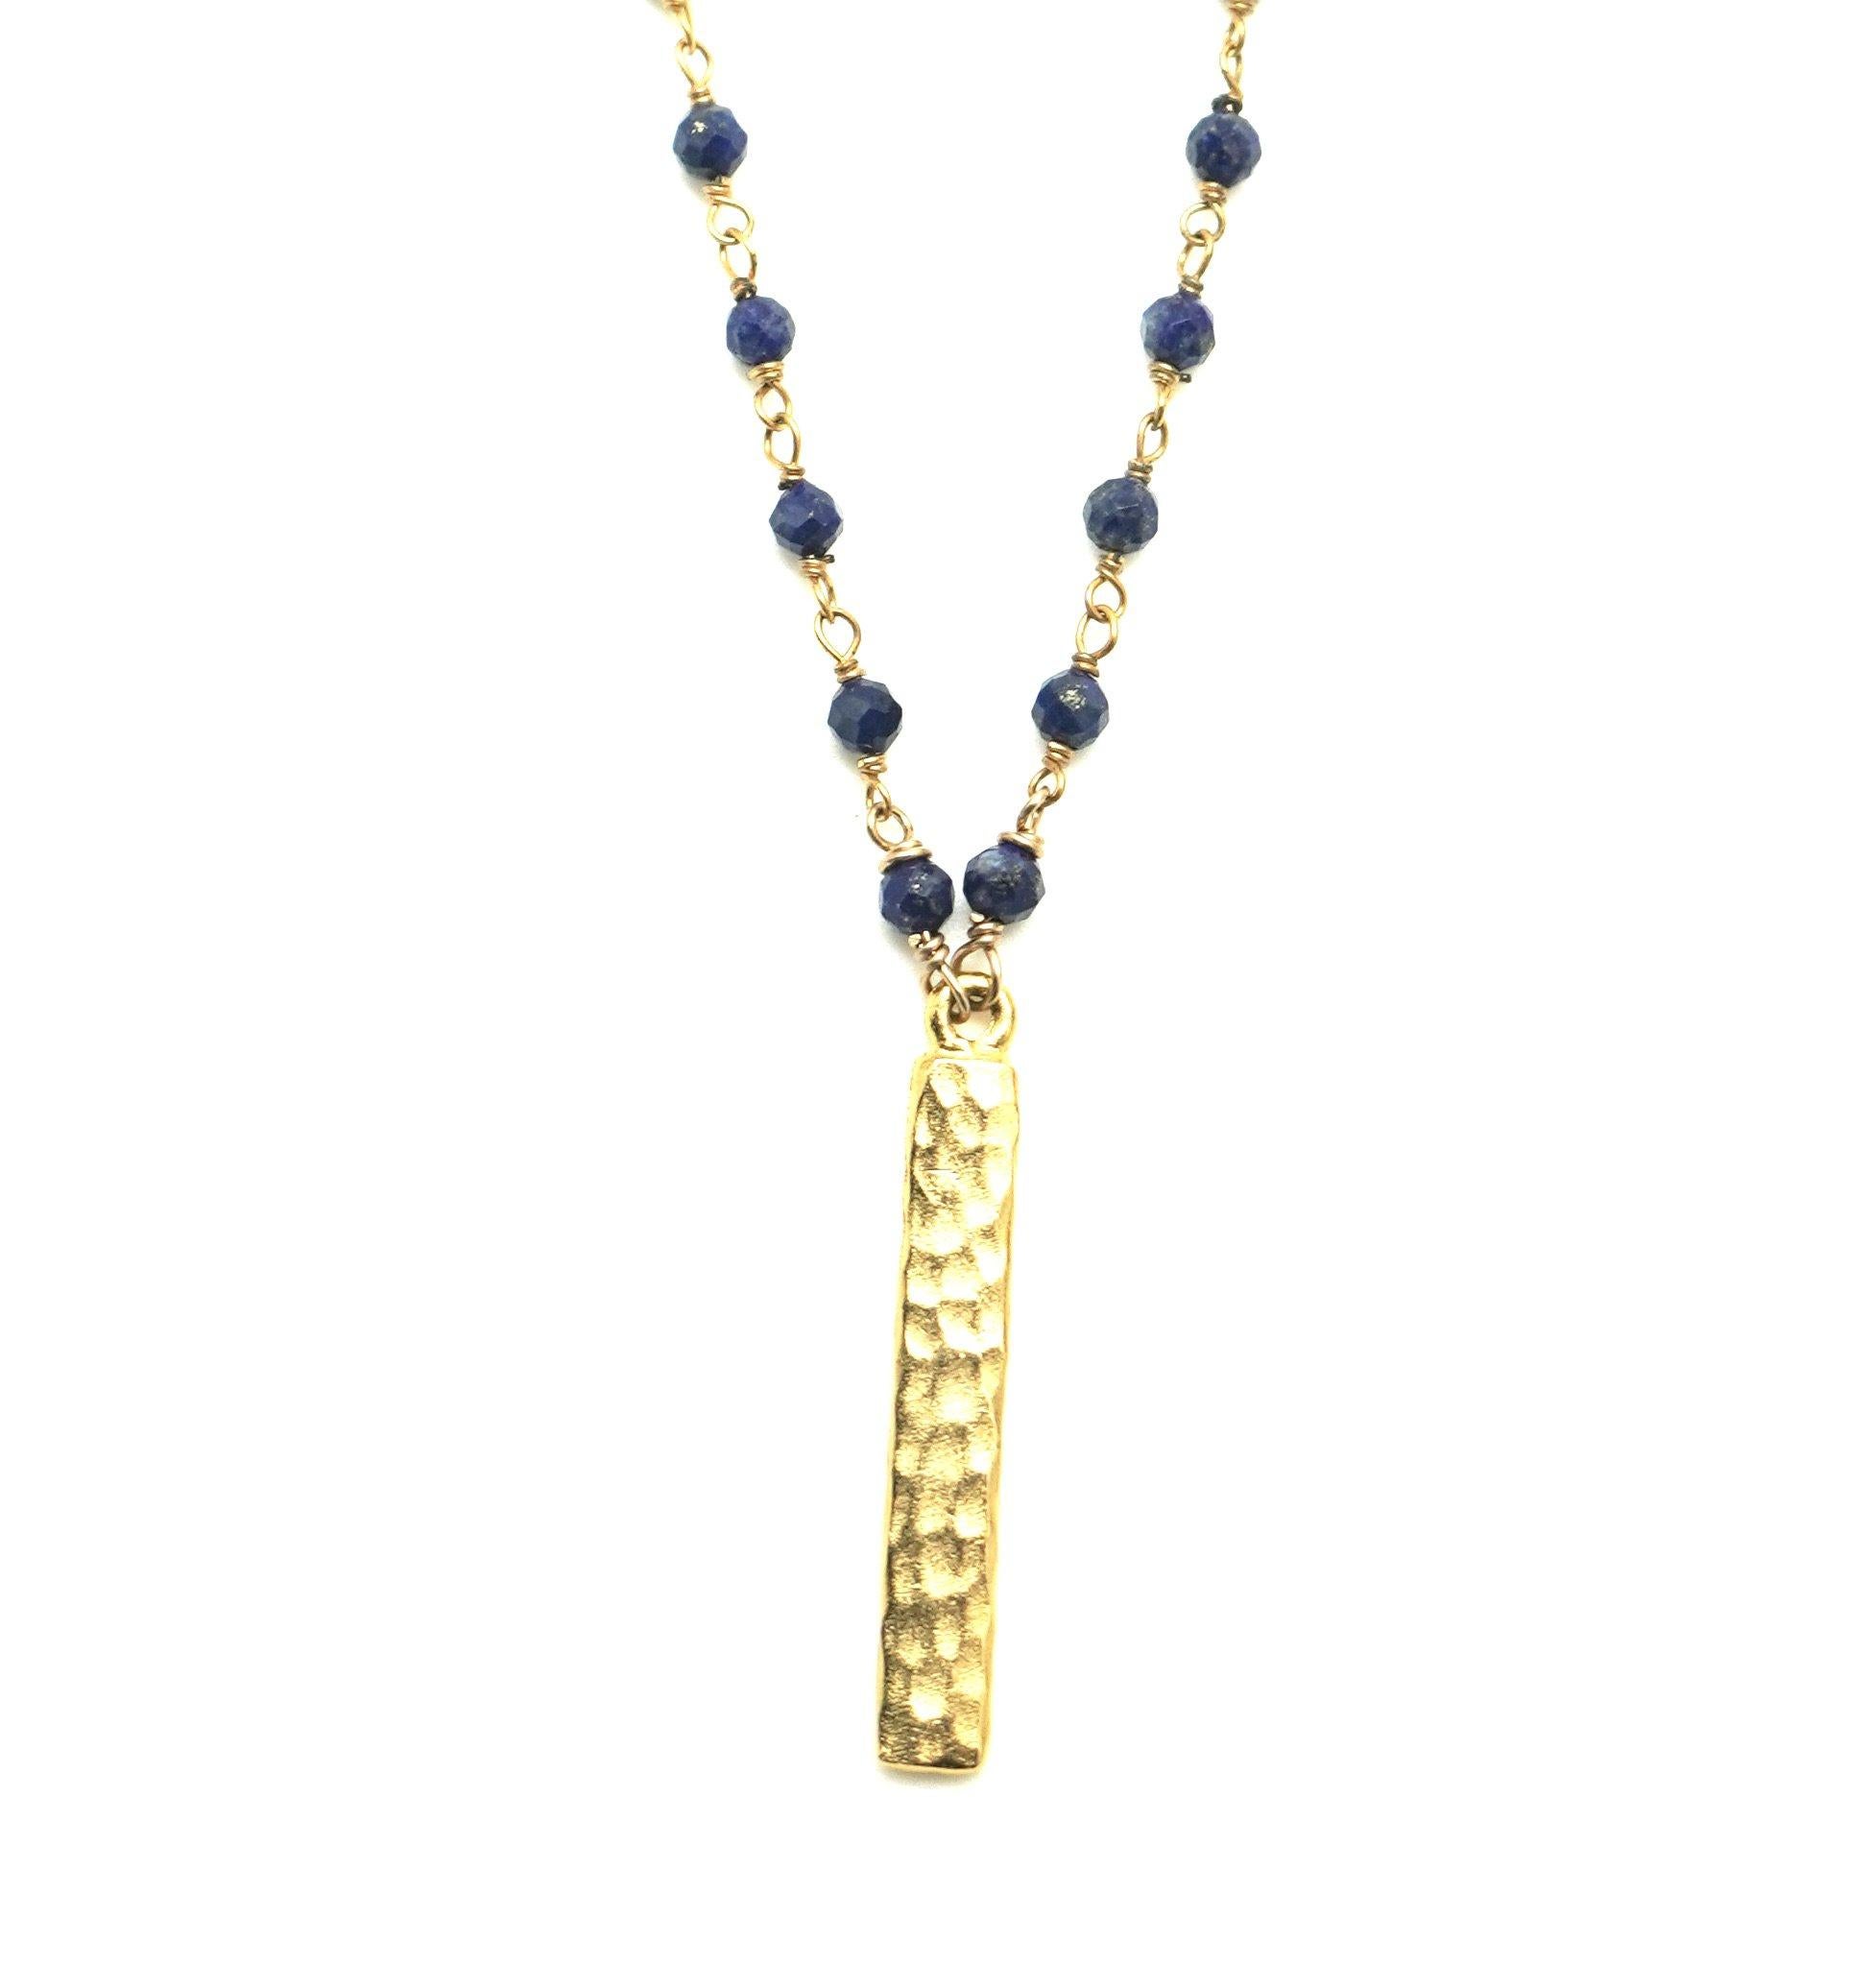 Story Behind the Jewelry
Azure celestial lapis gemstone necklace is accented with a 14K gold textured rectangle pendant.  Azure is a bright blue, cloudless skies.  The necklace represents the deep blue summer skies. 
Designed and handmade in Newport